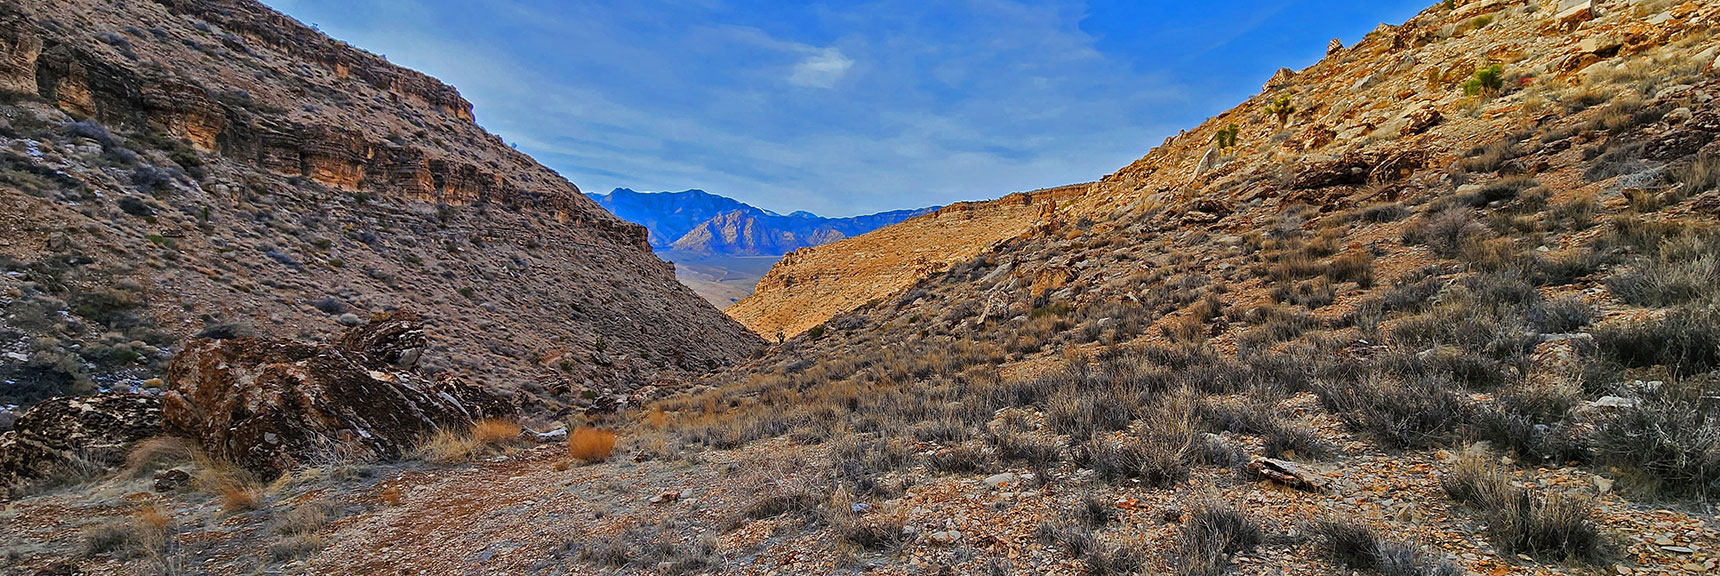 Continuing Descent Between Cliffs of Skull Canyon | Western Outer Circuit | Blue Diamond Hill | Red Rock Canyon, Nevada